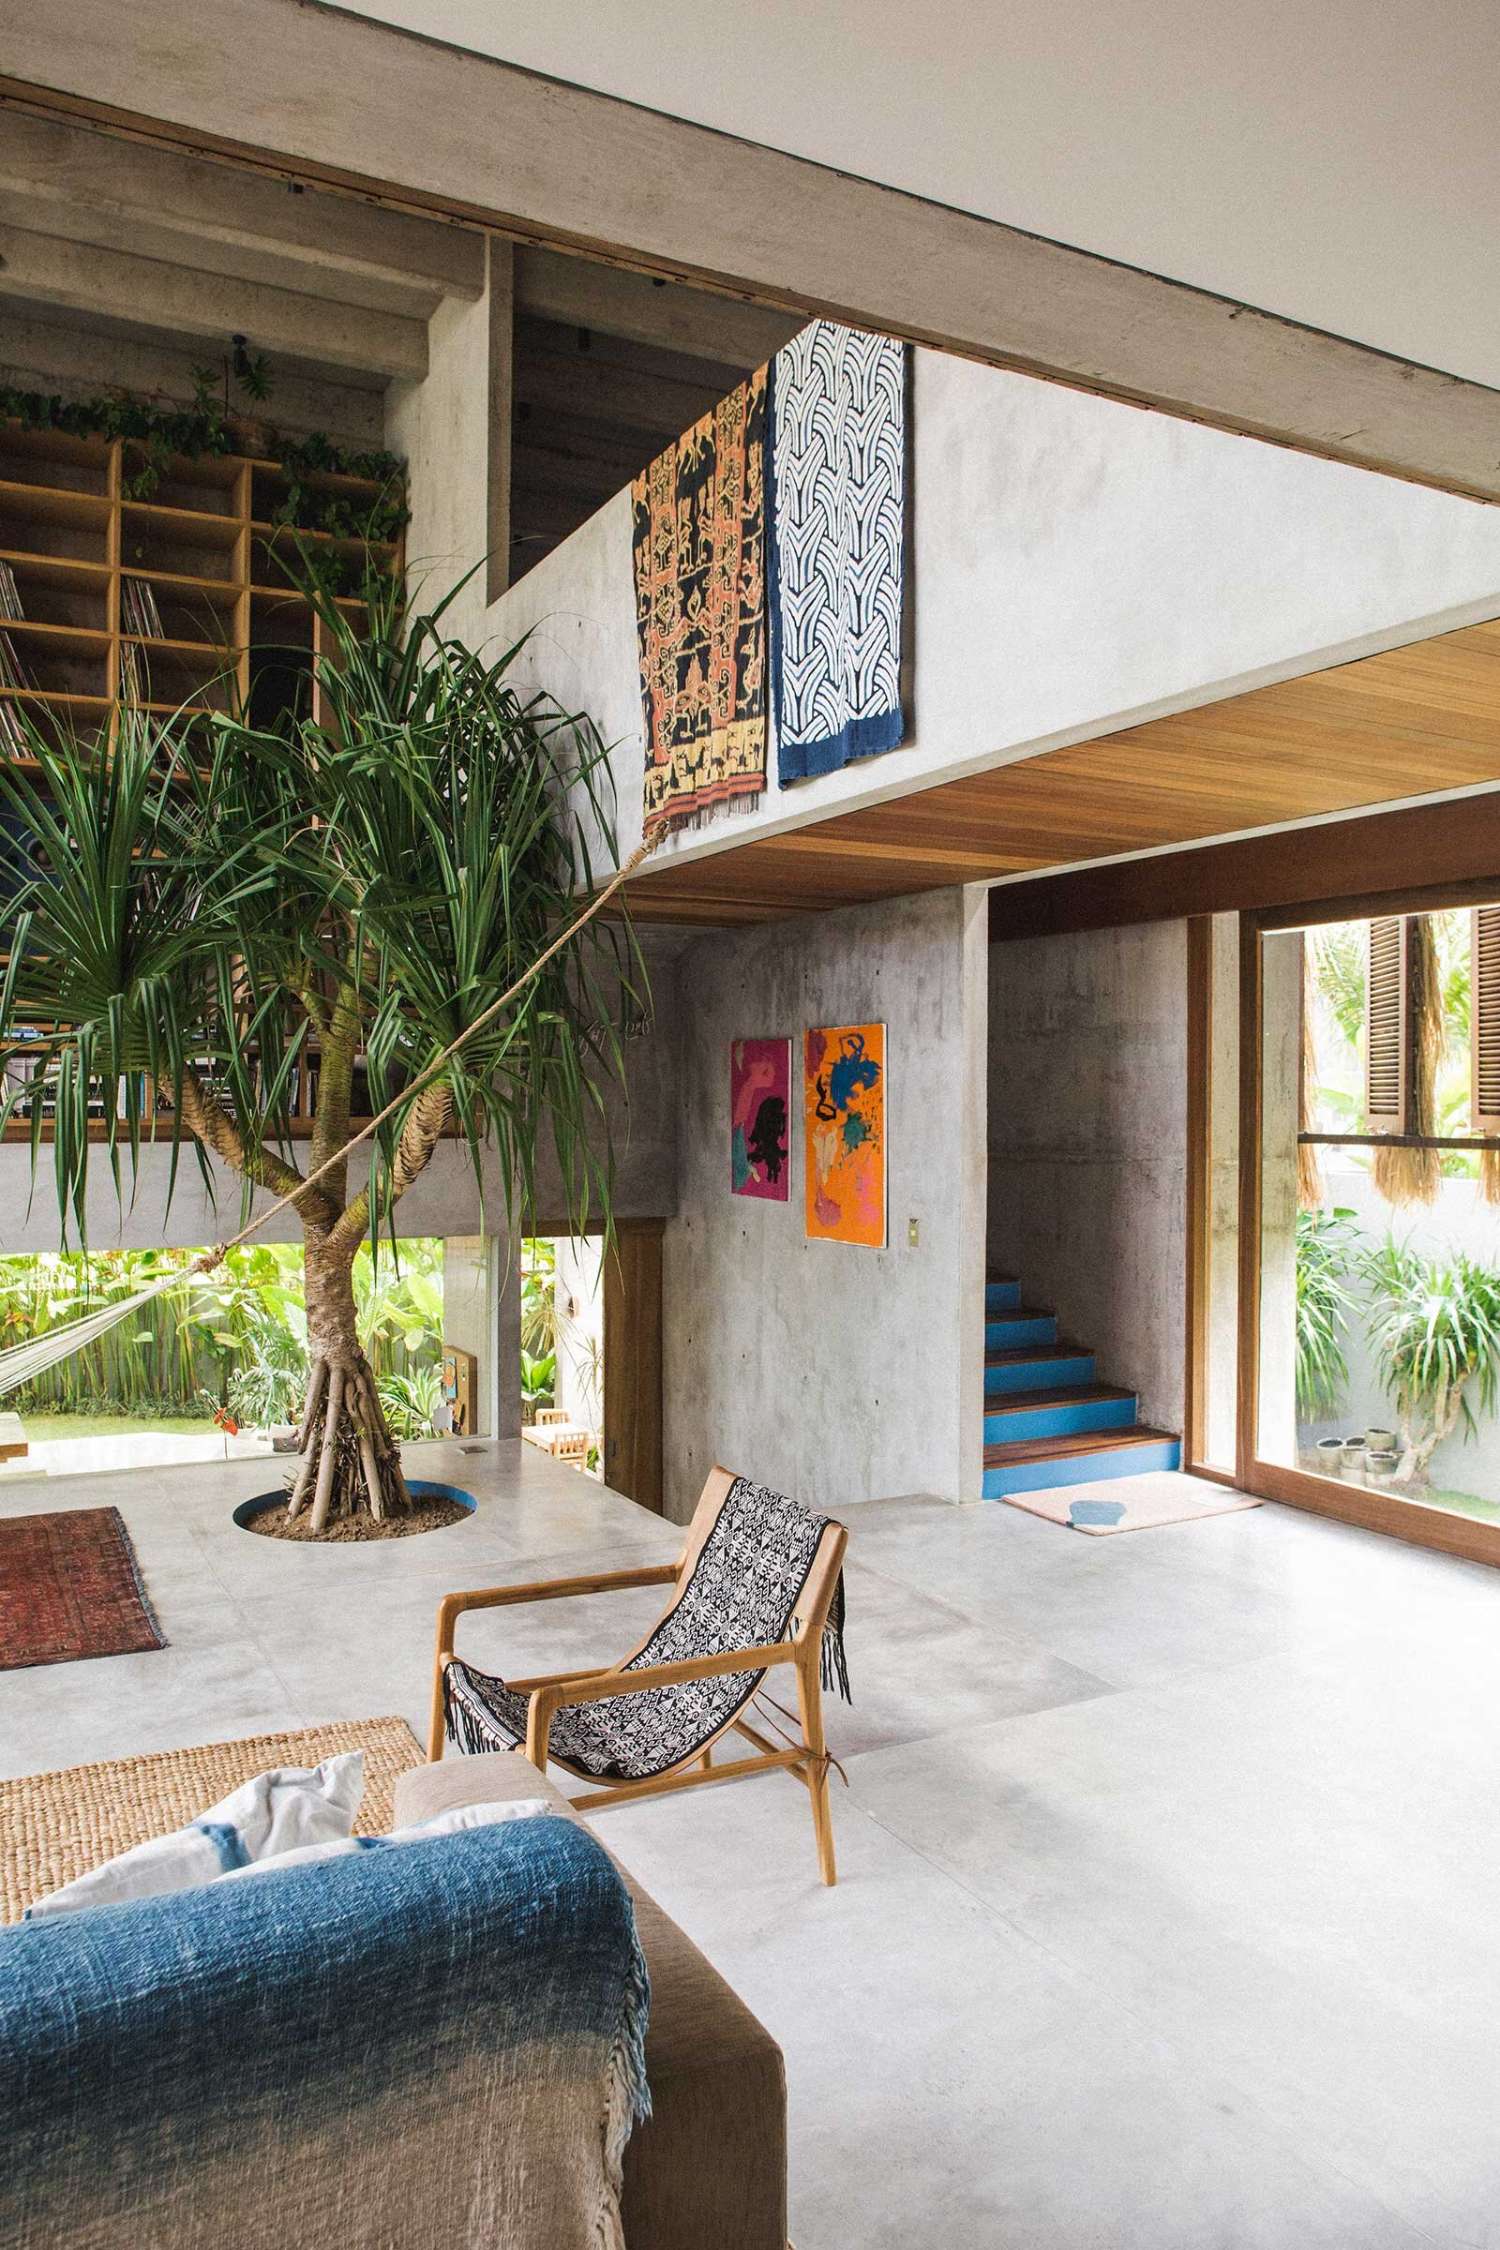 Tropical Brutalism: Concrete and Timber Home in Bali